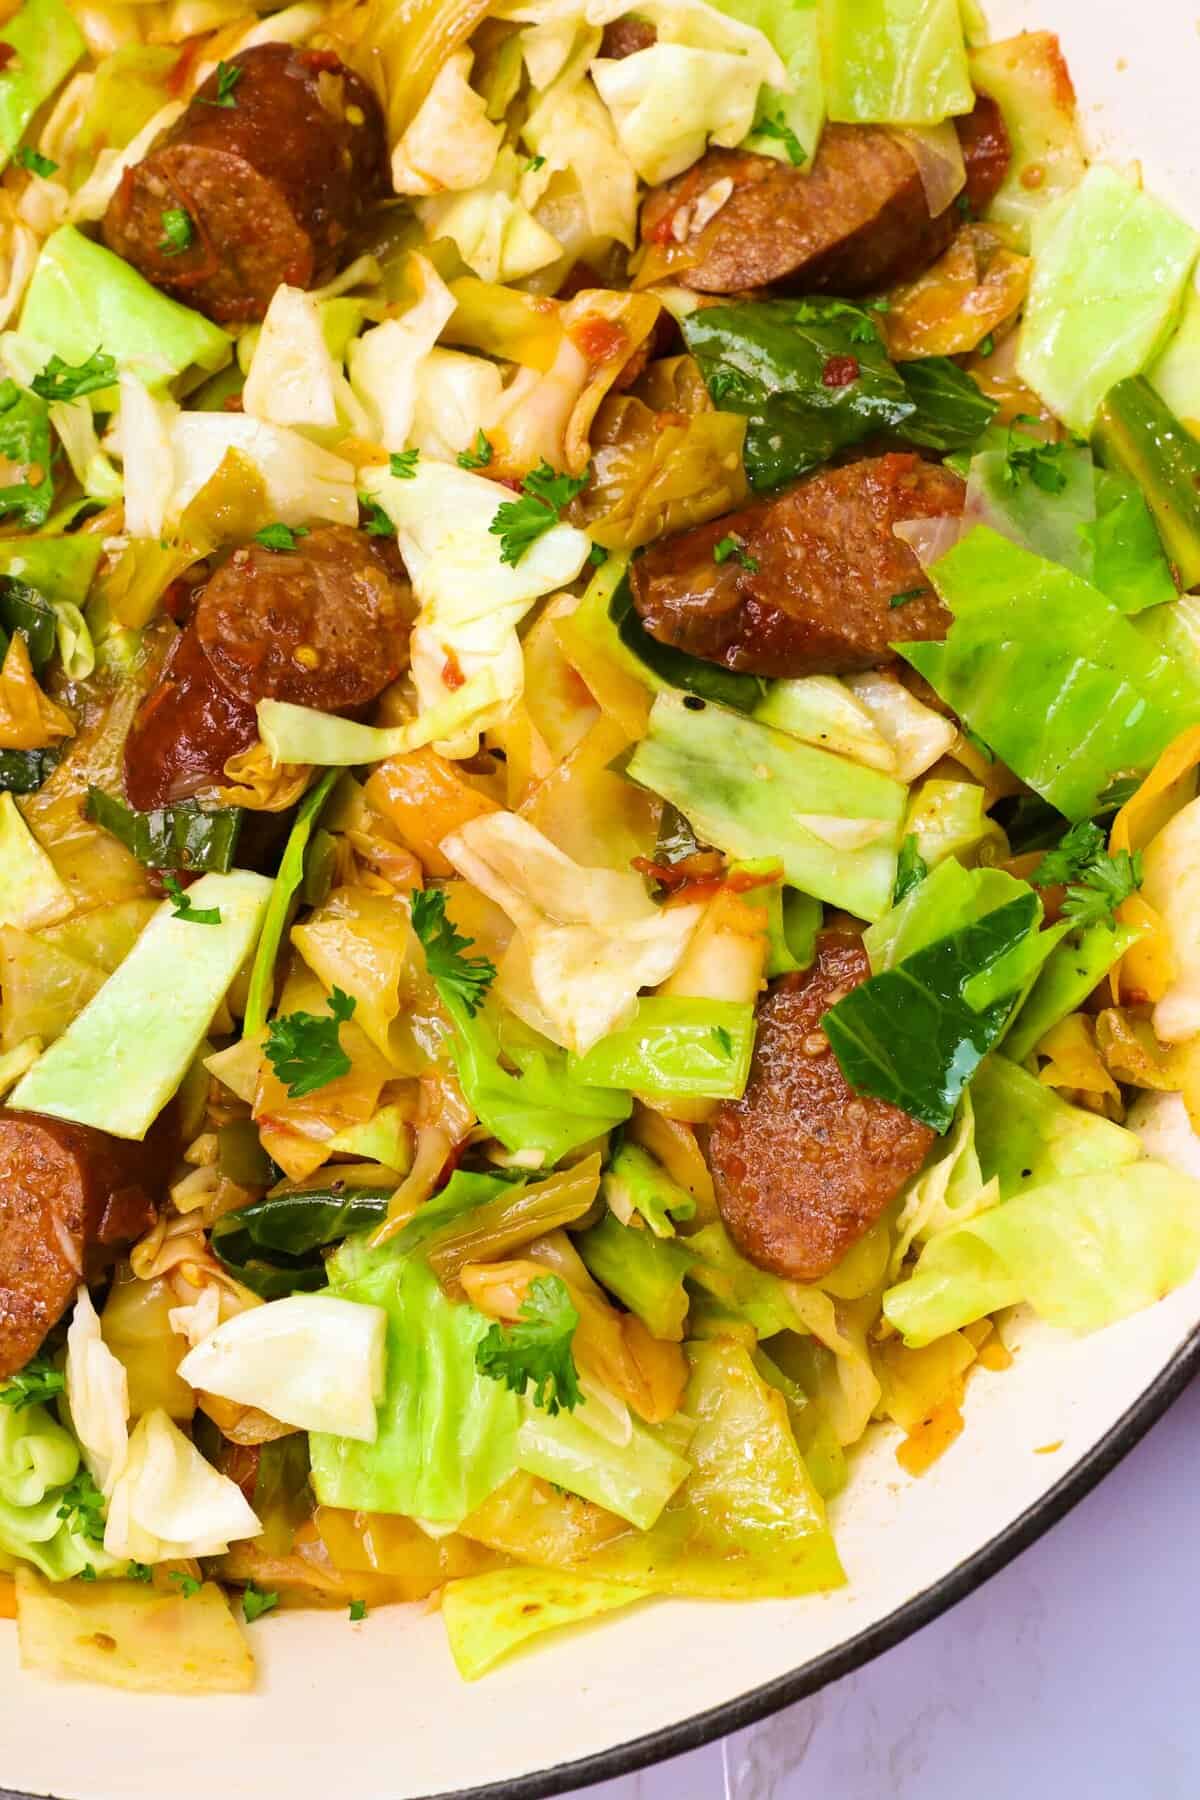 Delicious sausage and cabbage for a healthy fast meal